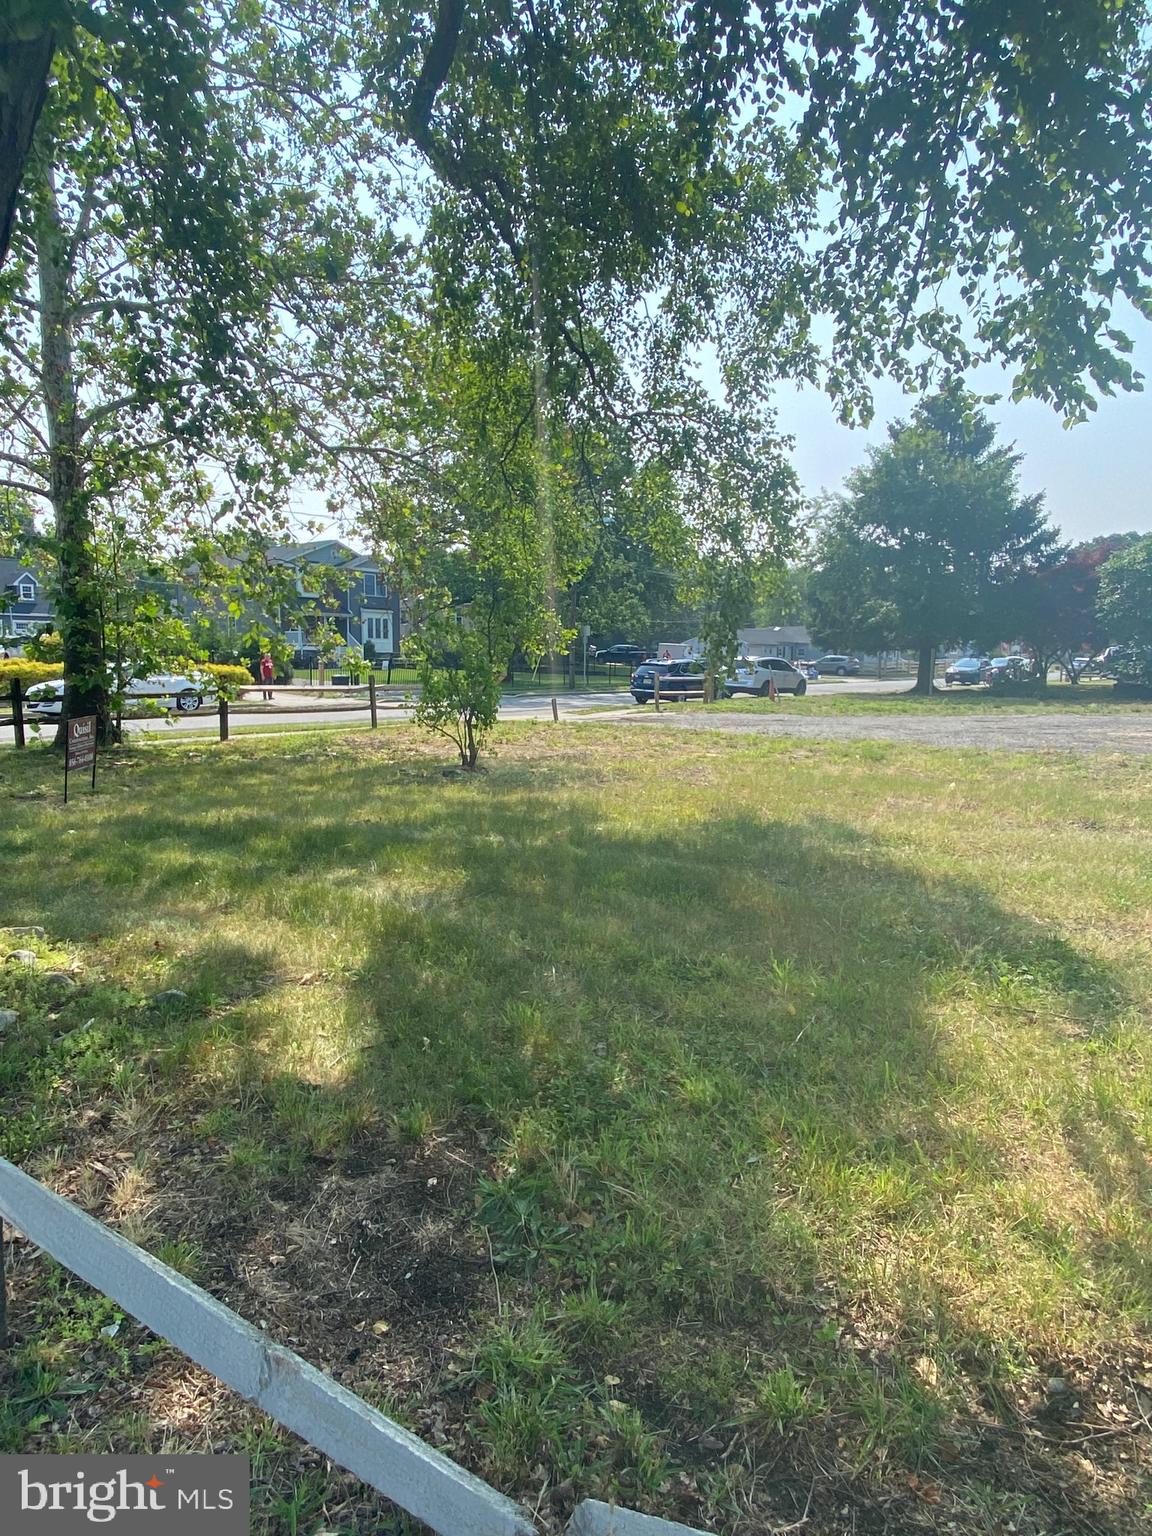 a big yard with lots of green space and trees in the background